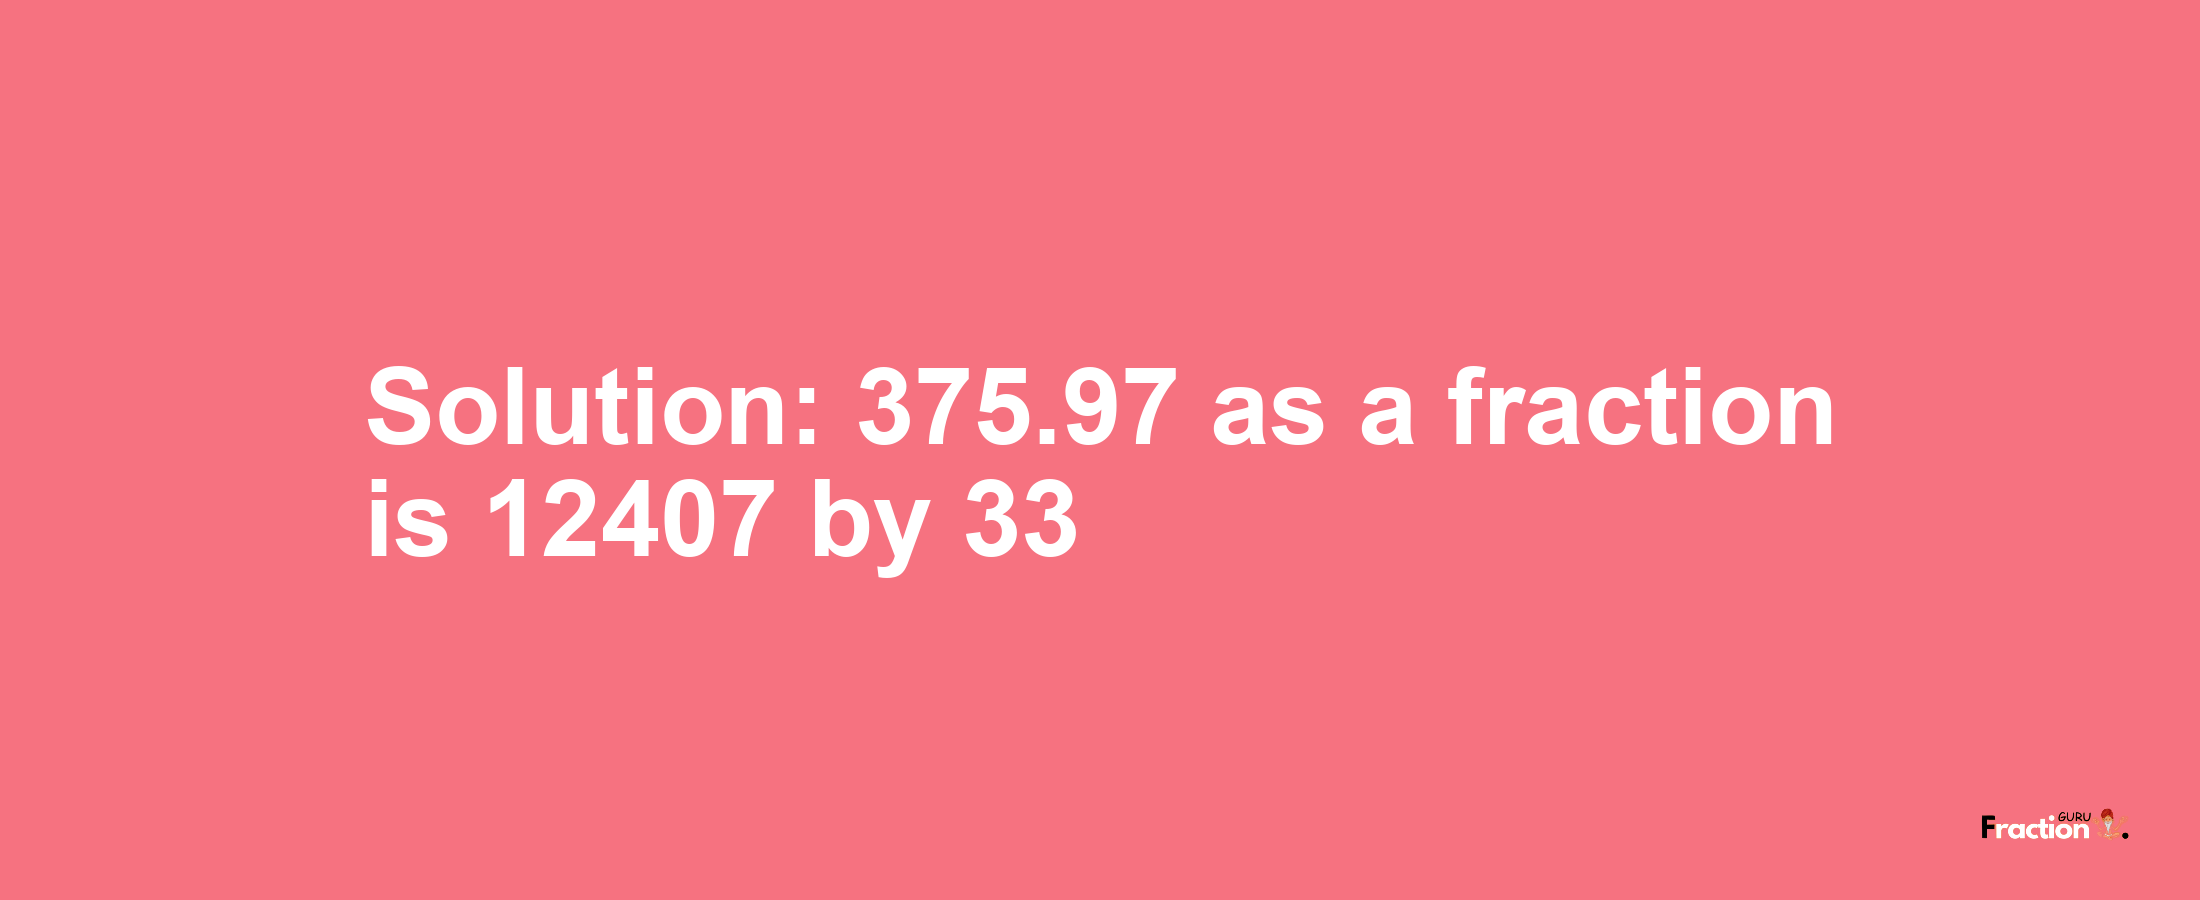 Solution:375.97 as a fraction is 12407/33